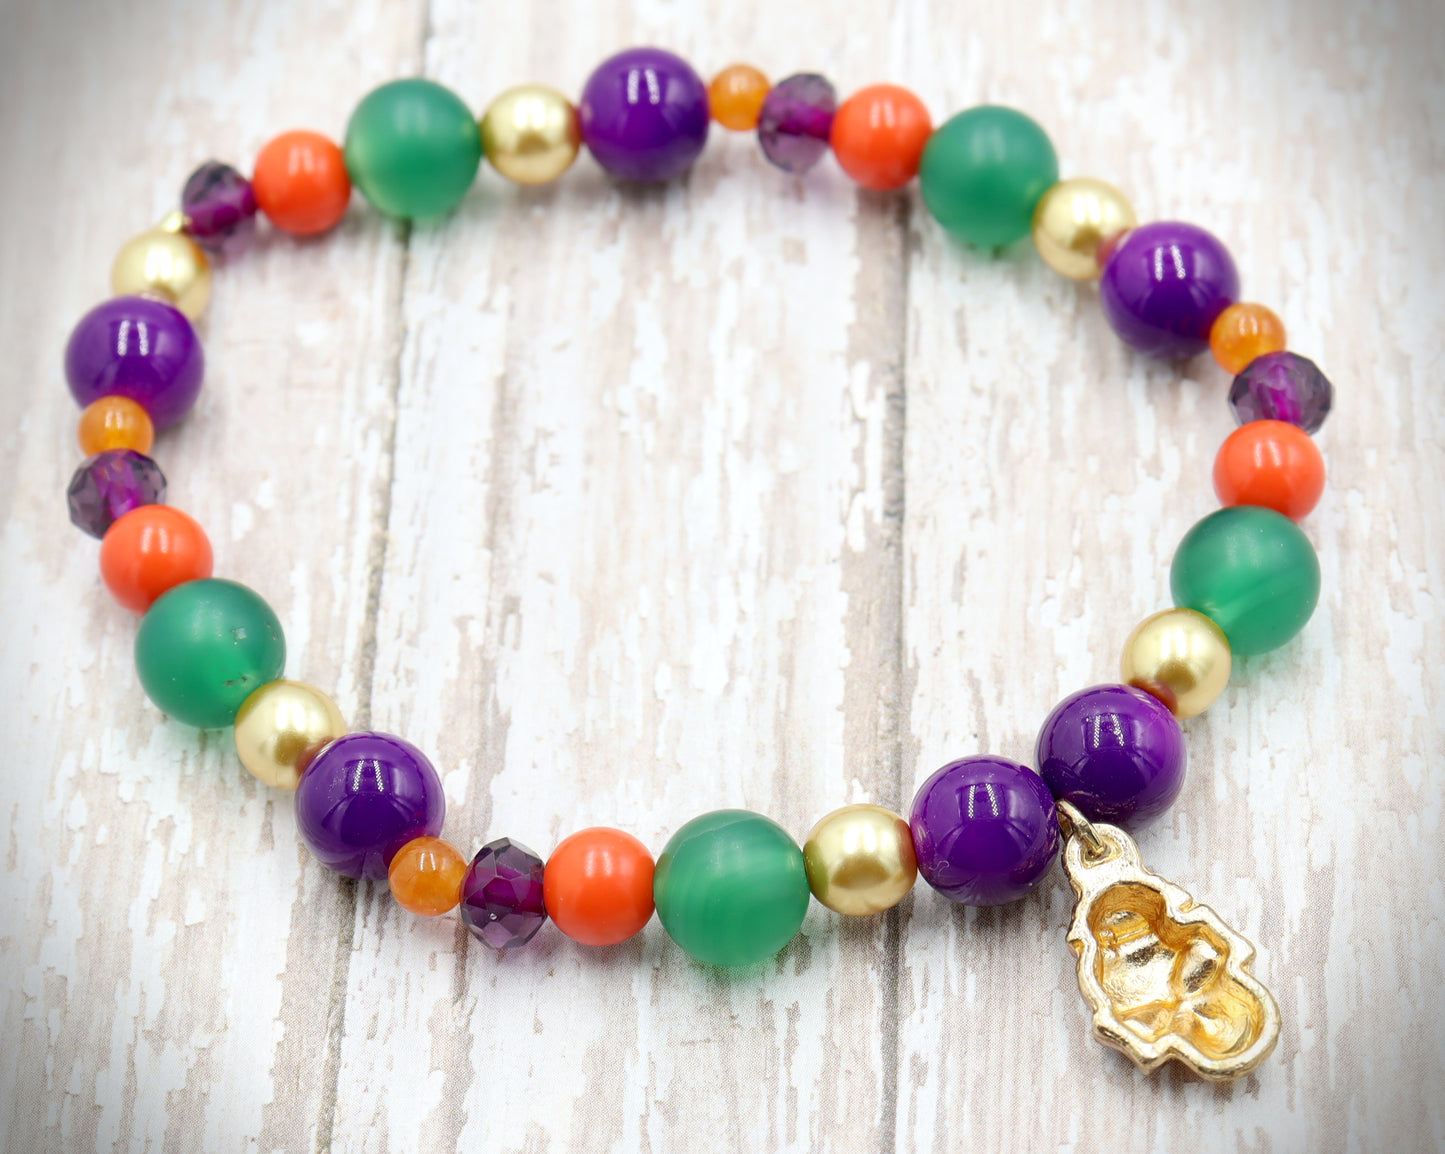 Don’t Mess with That Hoodoo Halloween in NOLA Skull Charm Bracelet by Monkey's Mojo